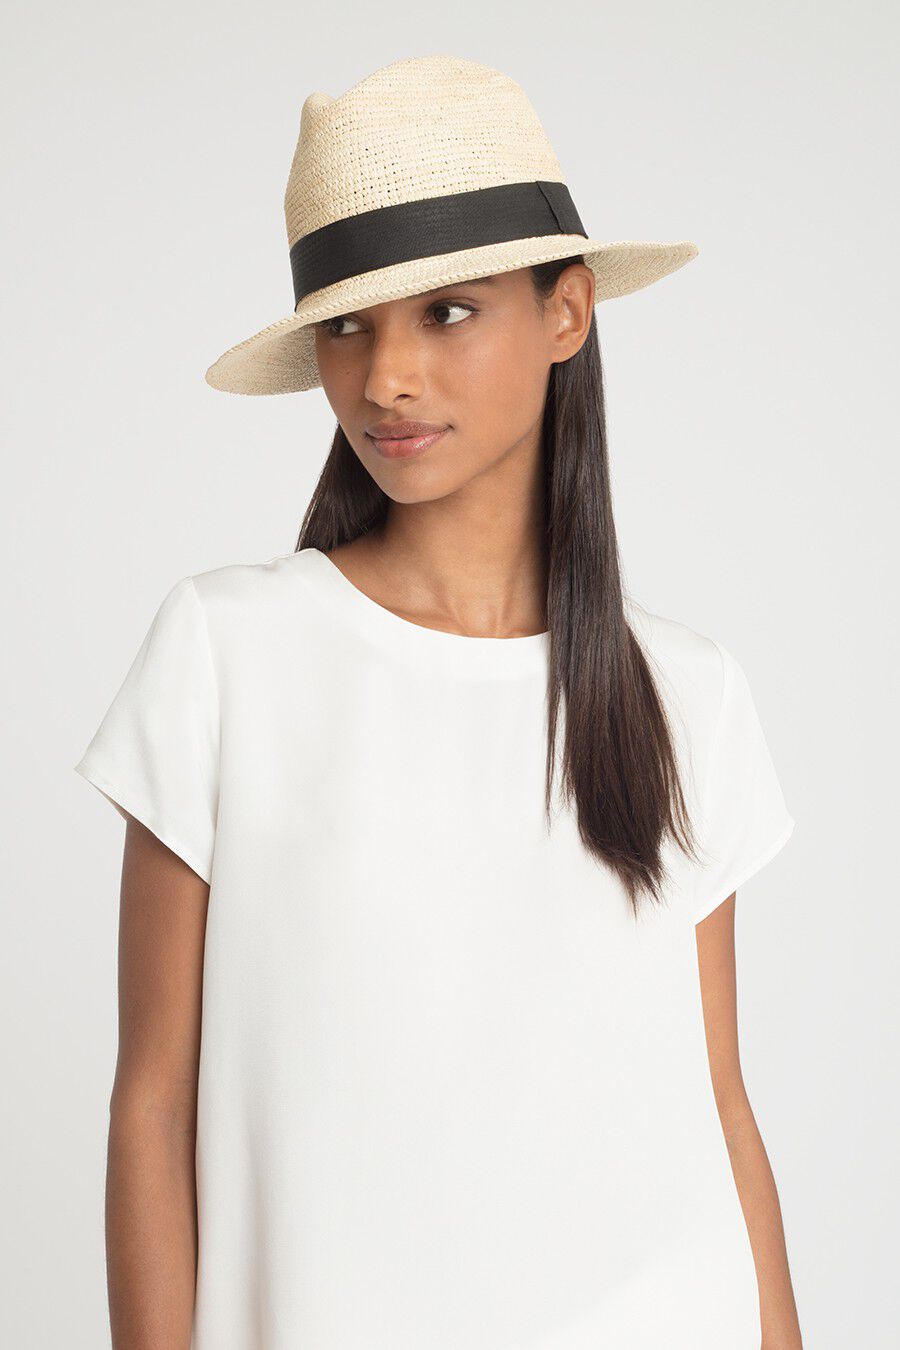 Woman in a hat and top looking to the side